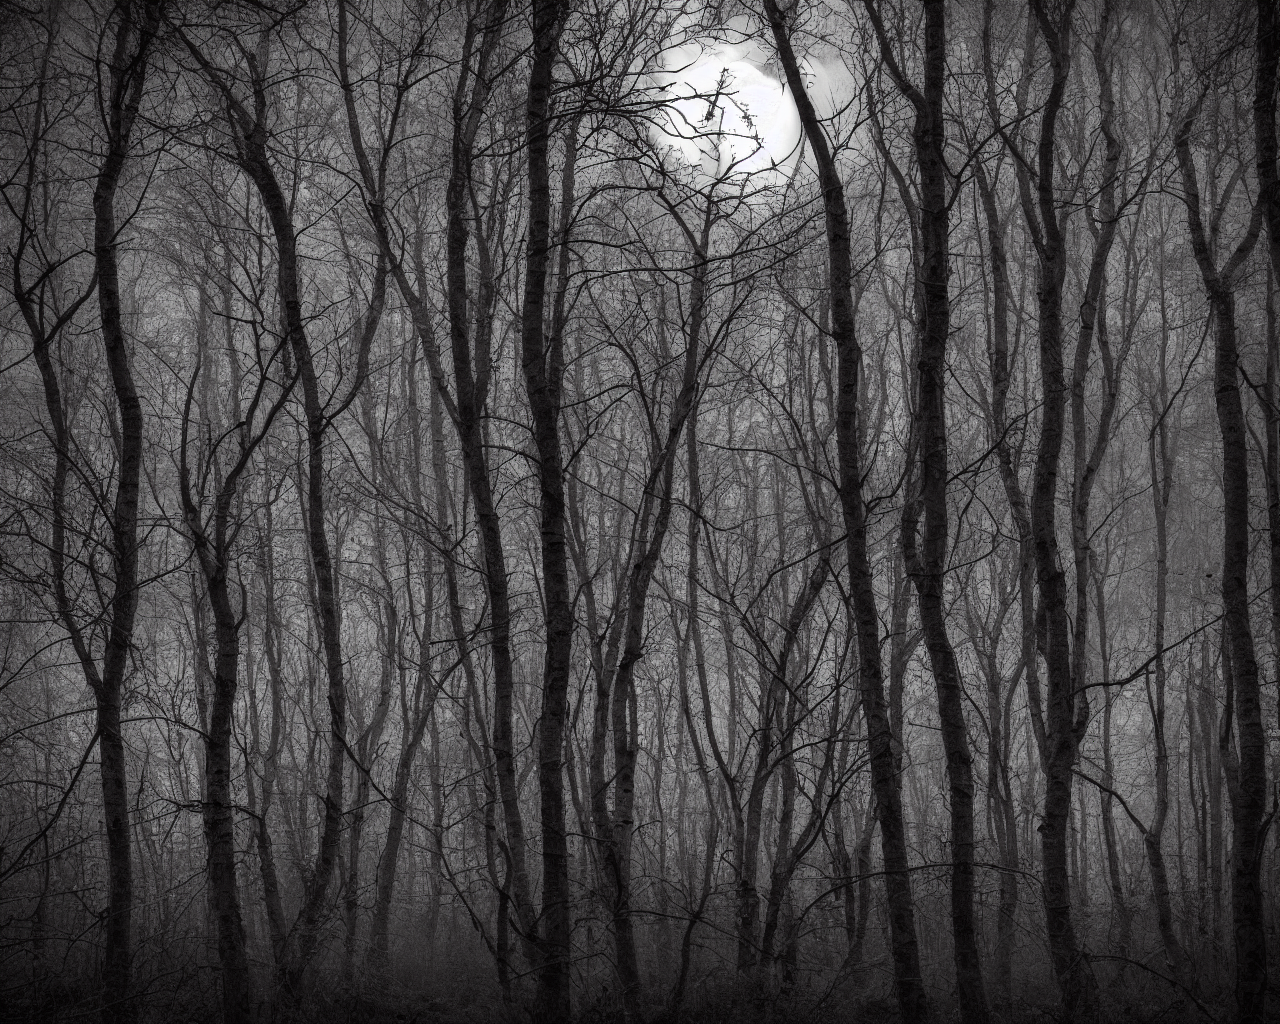 00028-16-nikon_d8102C_spooky_haunted_forest_at_night_under_a_full_moon2C_ghost.png